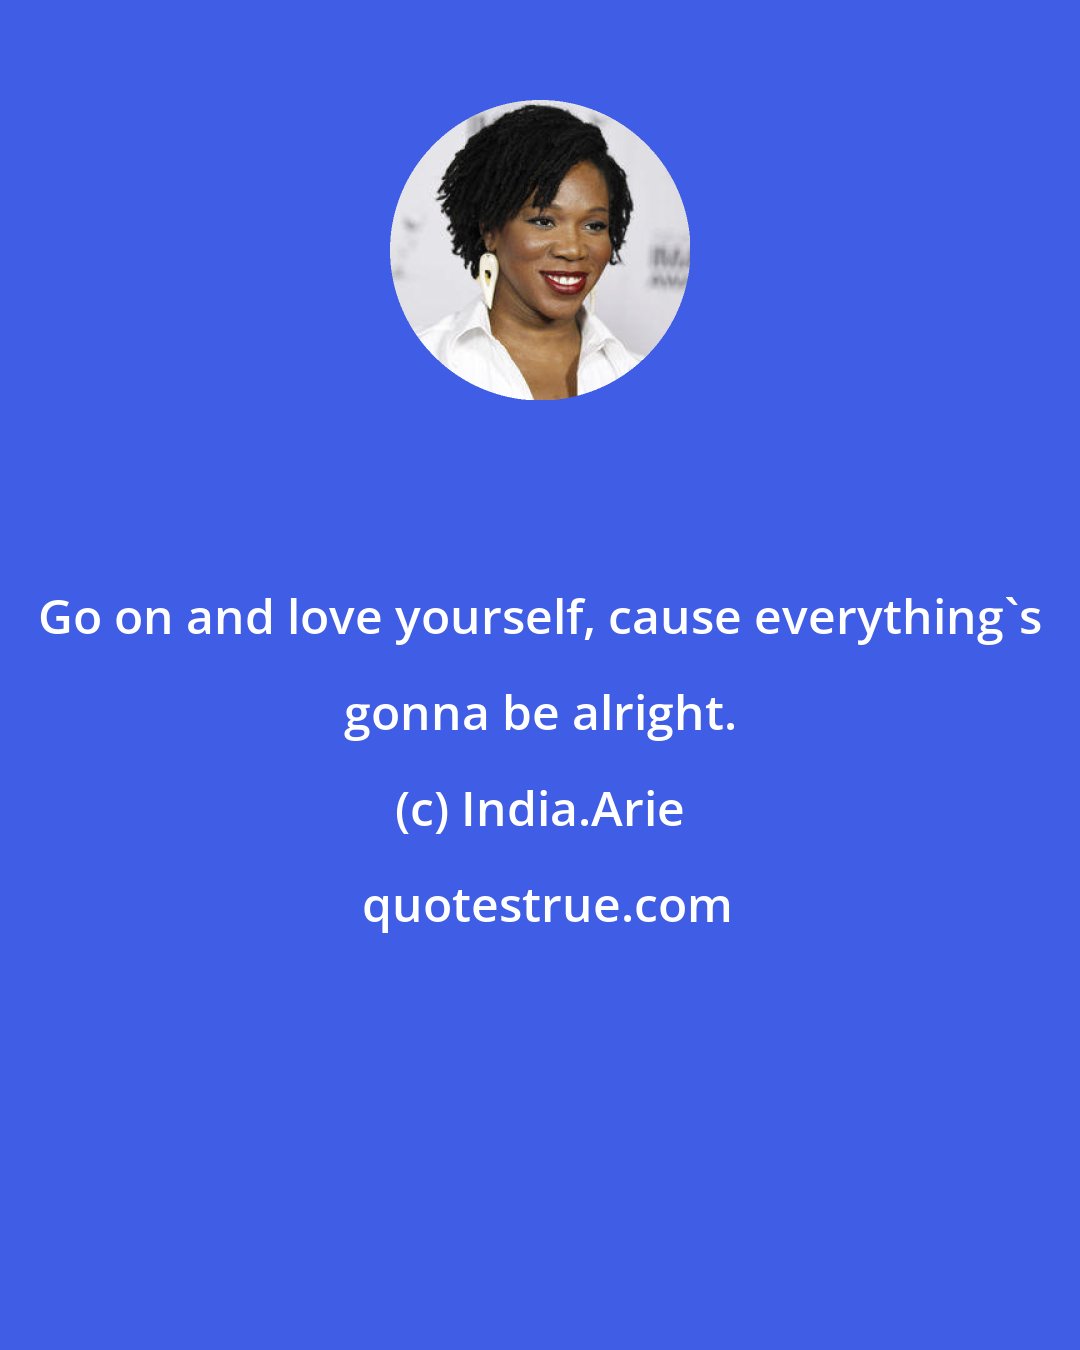 India.Arie: Go on and love yourself, cause everything's gonna be alright.